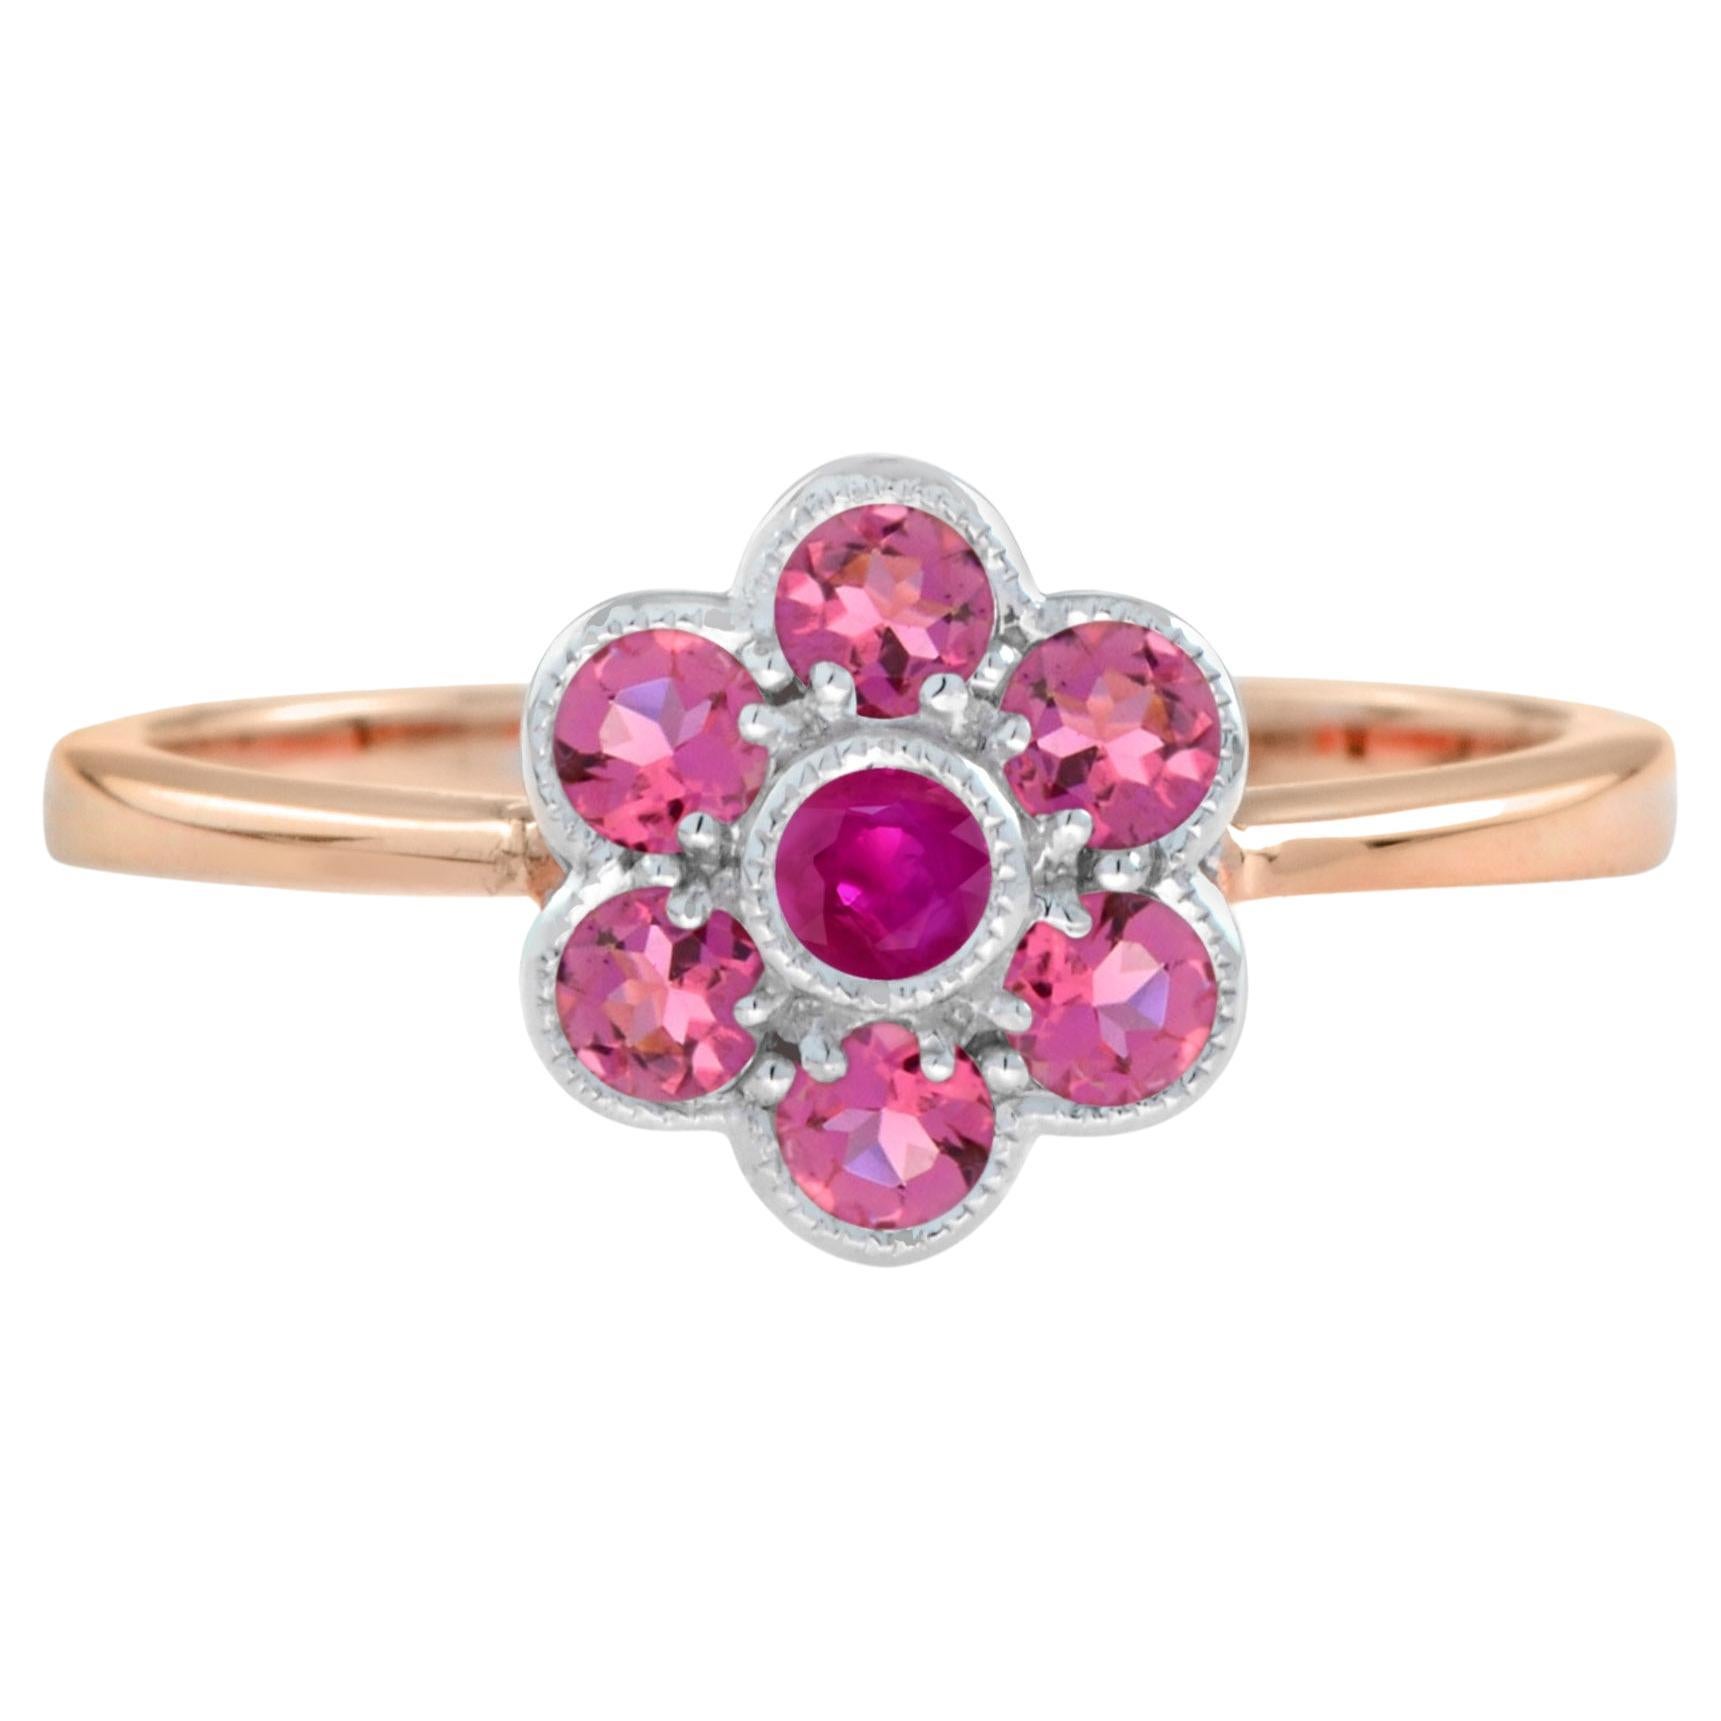 For Sale:  Ruby and Pink Tourmaline Floral Cluster Ring in 14K Rose Gold 3